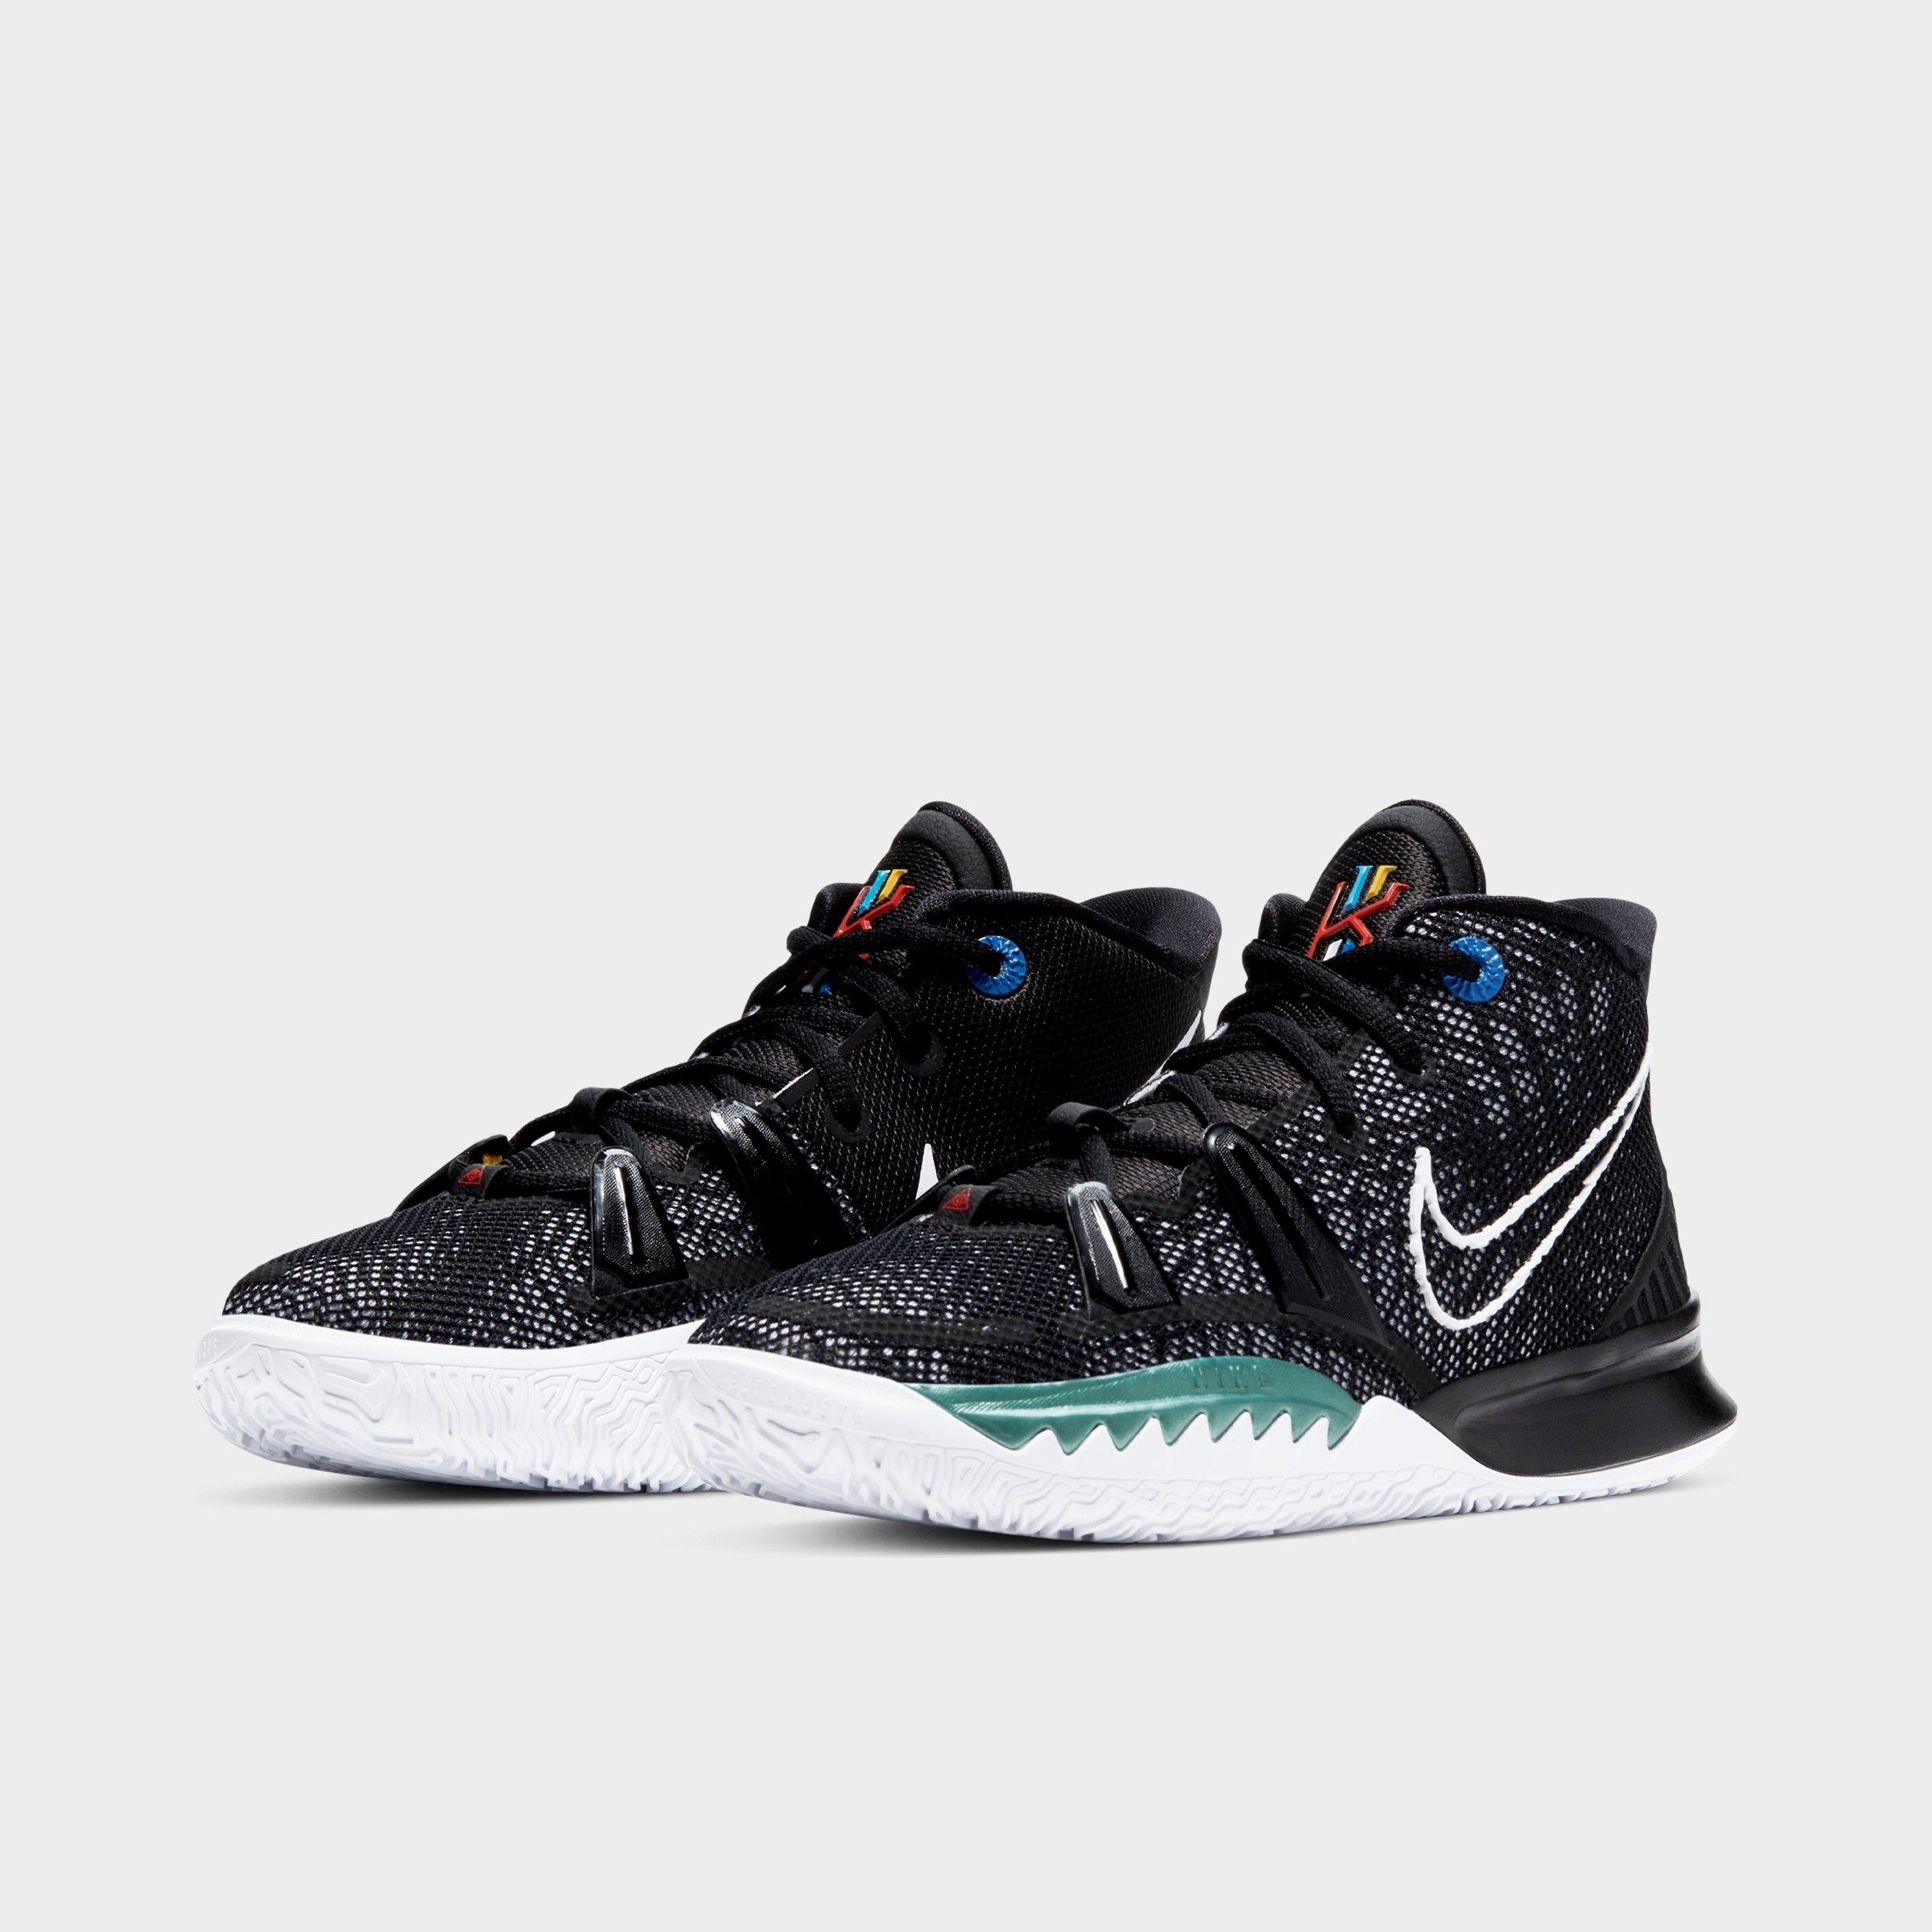 kyrie shoes 7